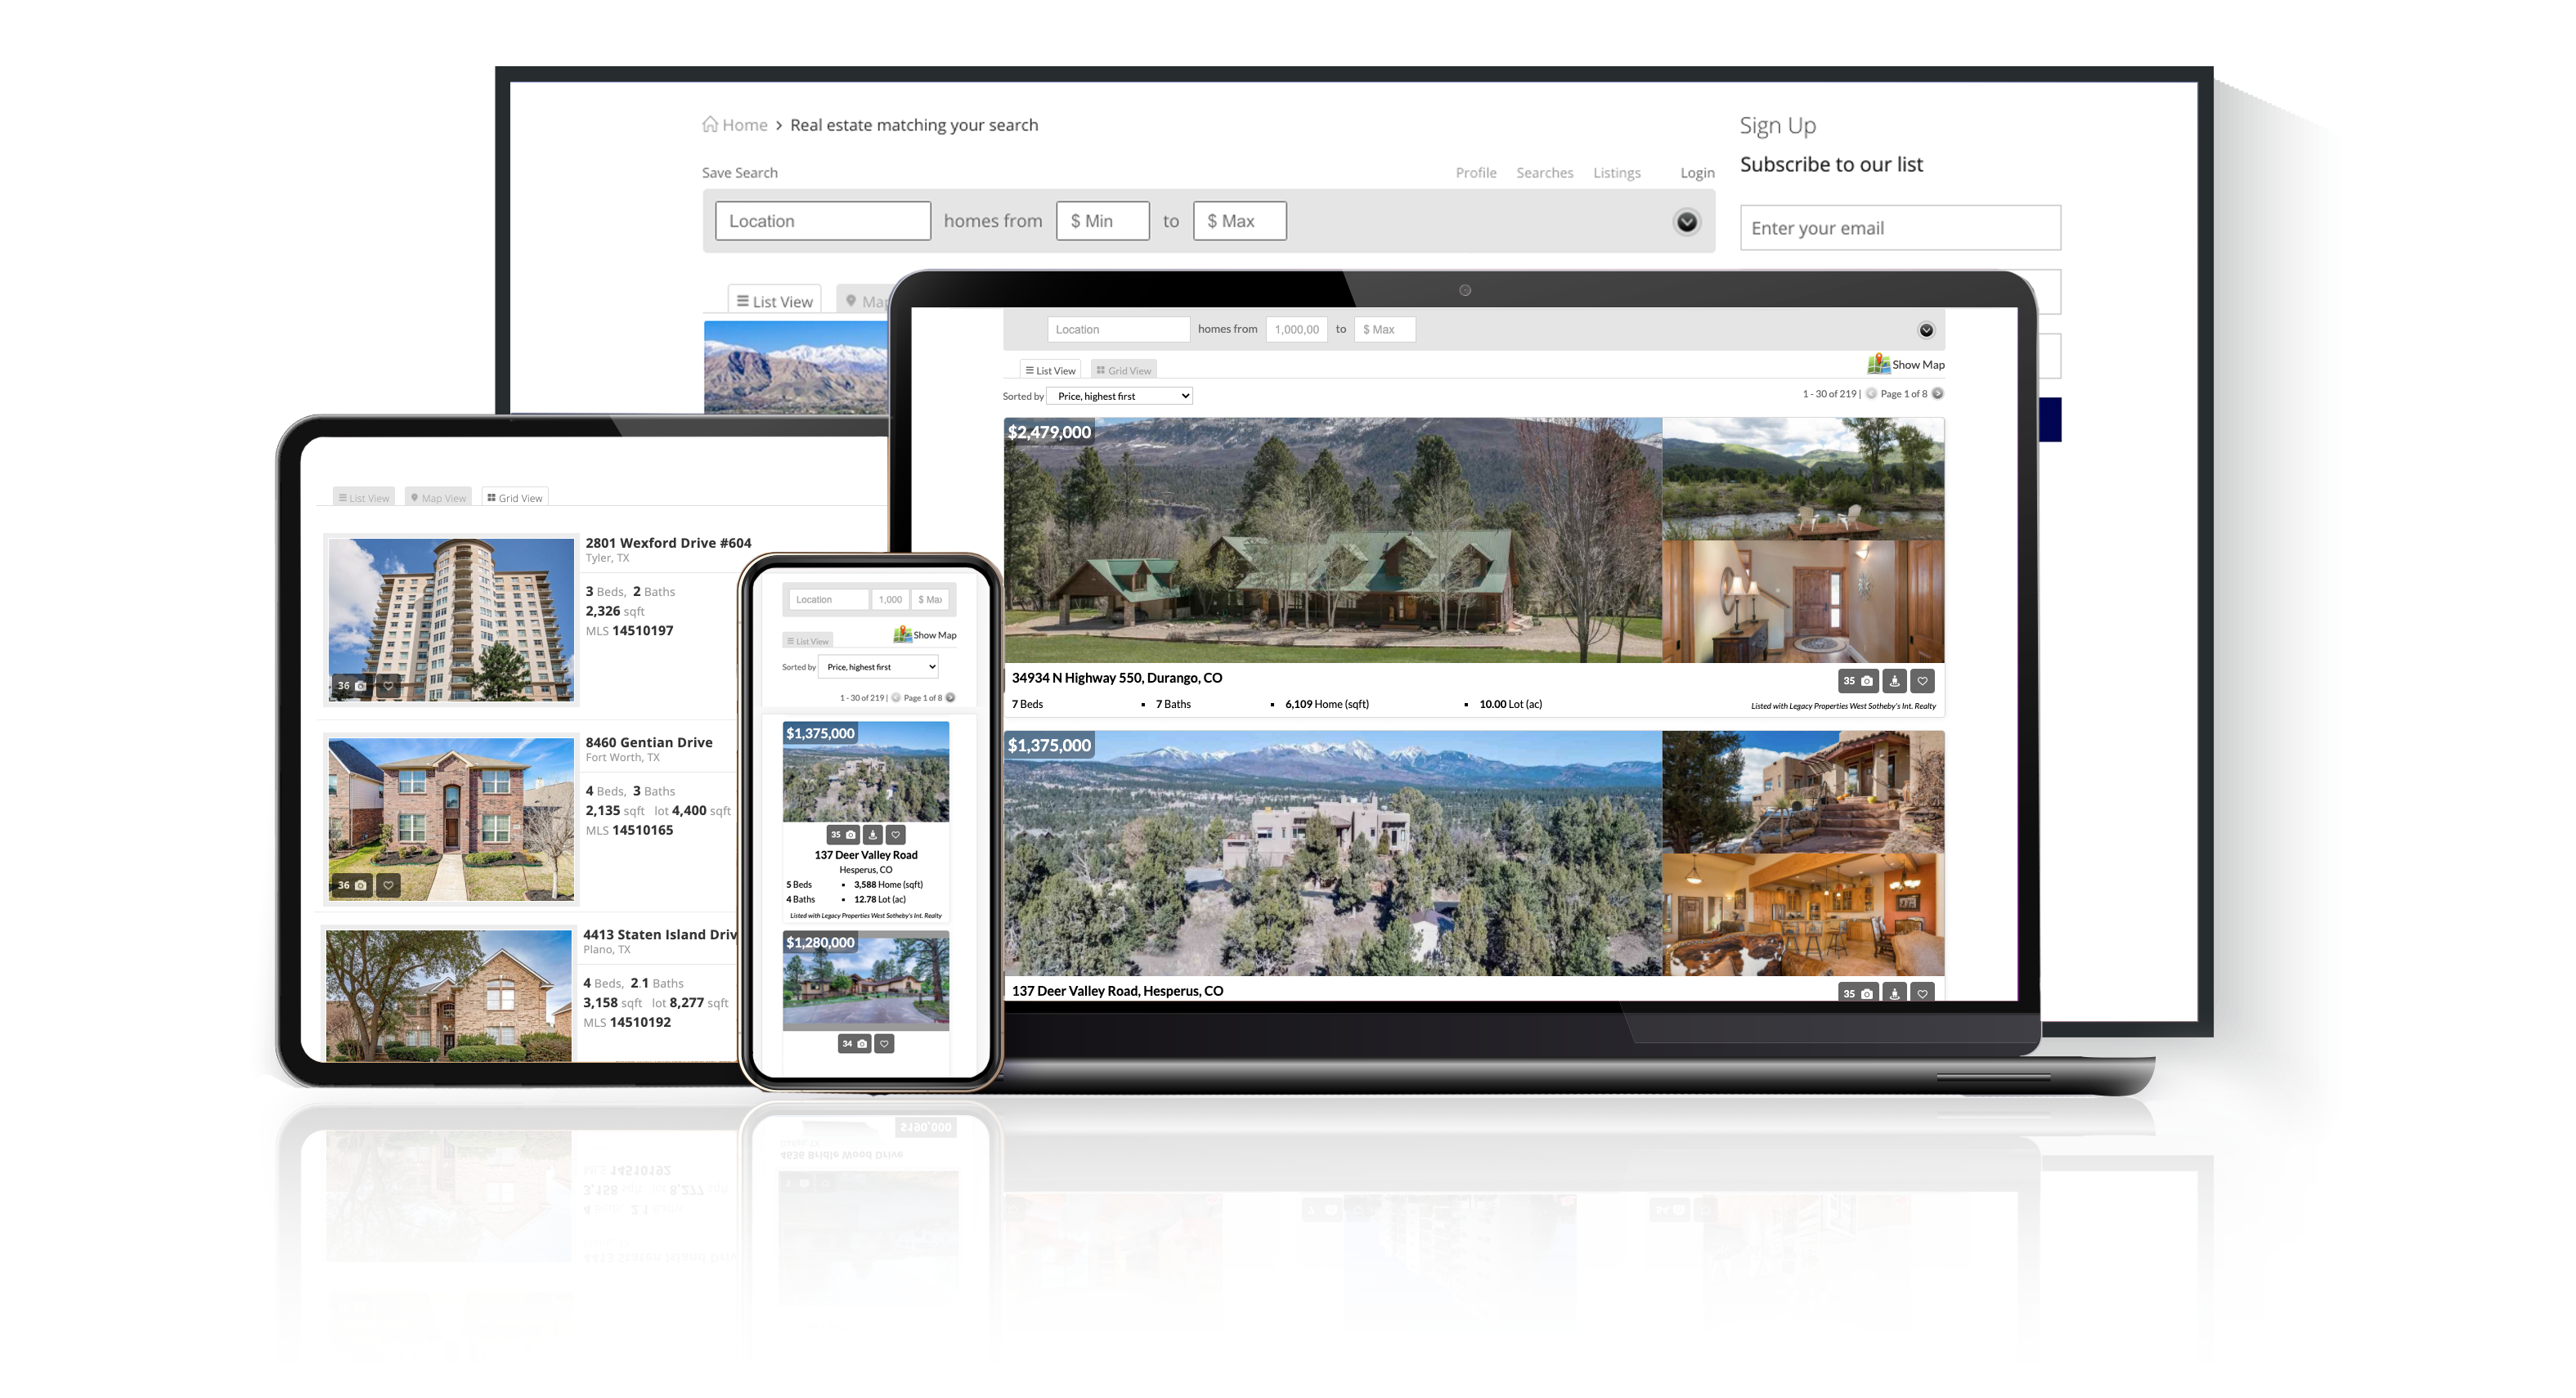 Visitors can easily find MLS listings on your website with user-friendly property search widgets, including a powerful map search tool and slideshows of highlighted properties.